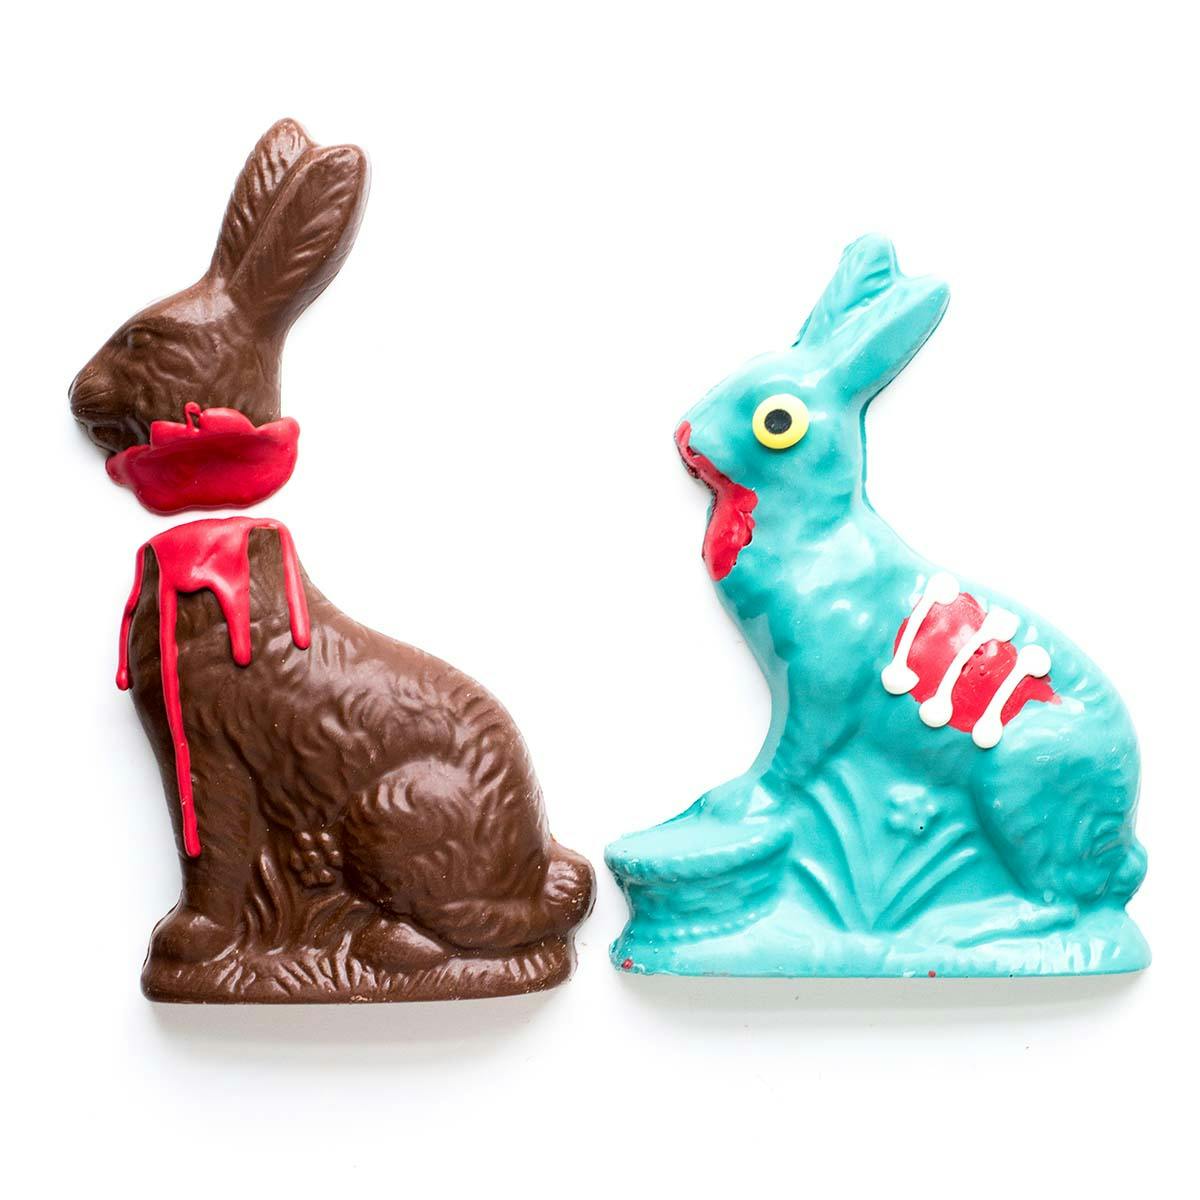 Easter Chocolate Zombie + Victim Bunny Set - 2 Pack by Sugar Plum |  Goldbelly